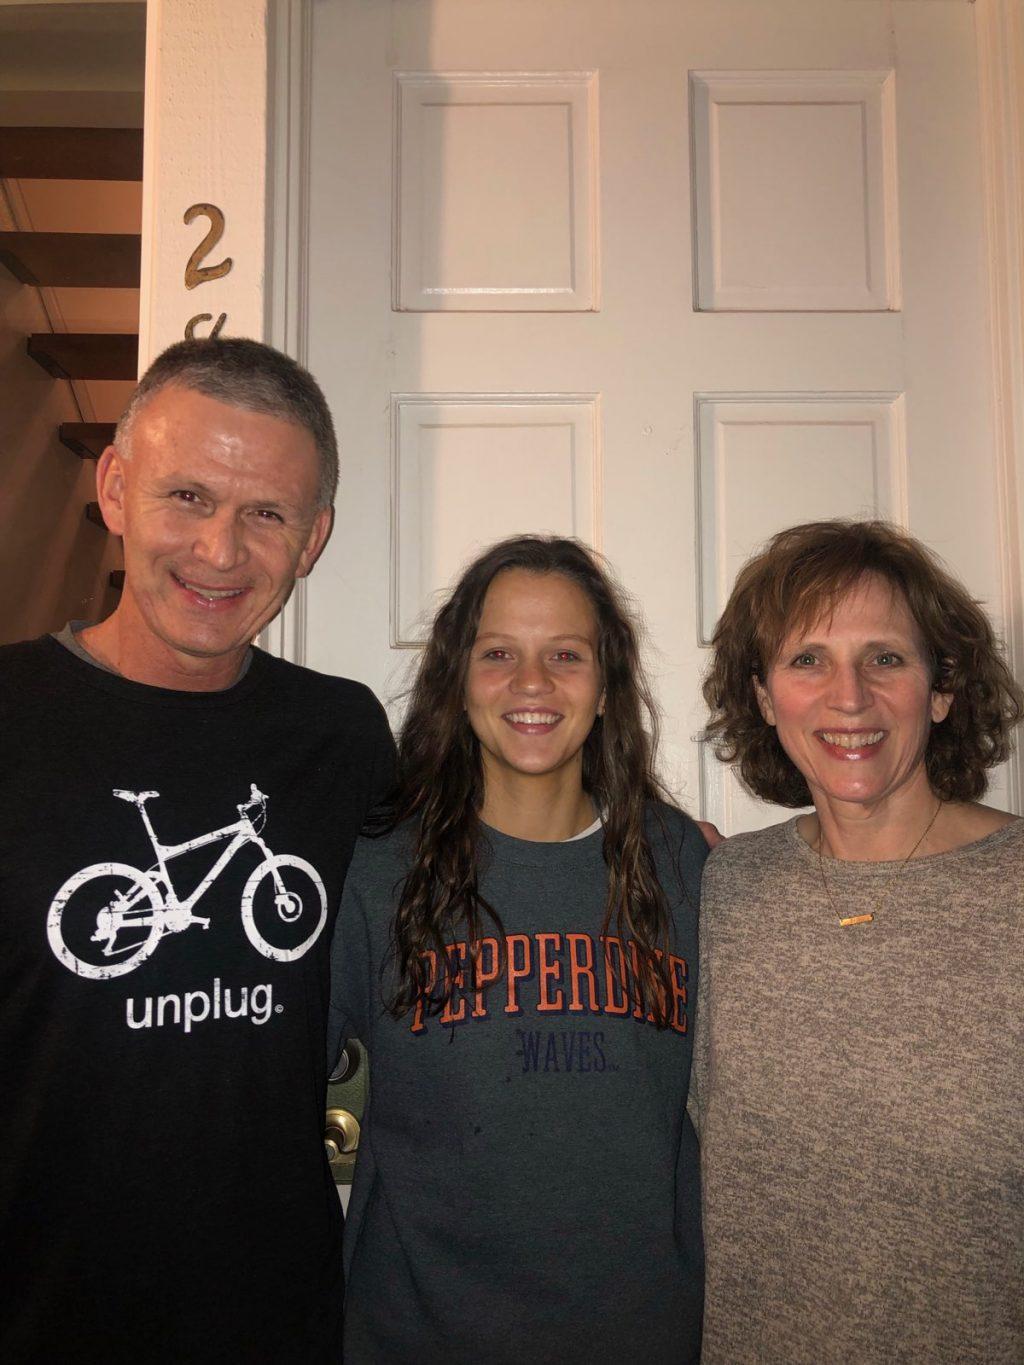 First-year Mary Paige Rowsey stands in between her parents, Perrin and Catherine, after they moved her to Malibu in February. Rowsey was able to move to Malibu for the spring 2021 semester after studying from home in the fall. Photo Courtesy of Mary Paige Rowsey